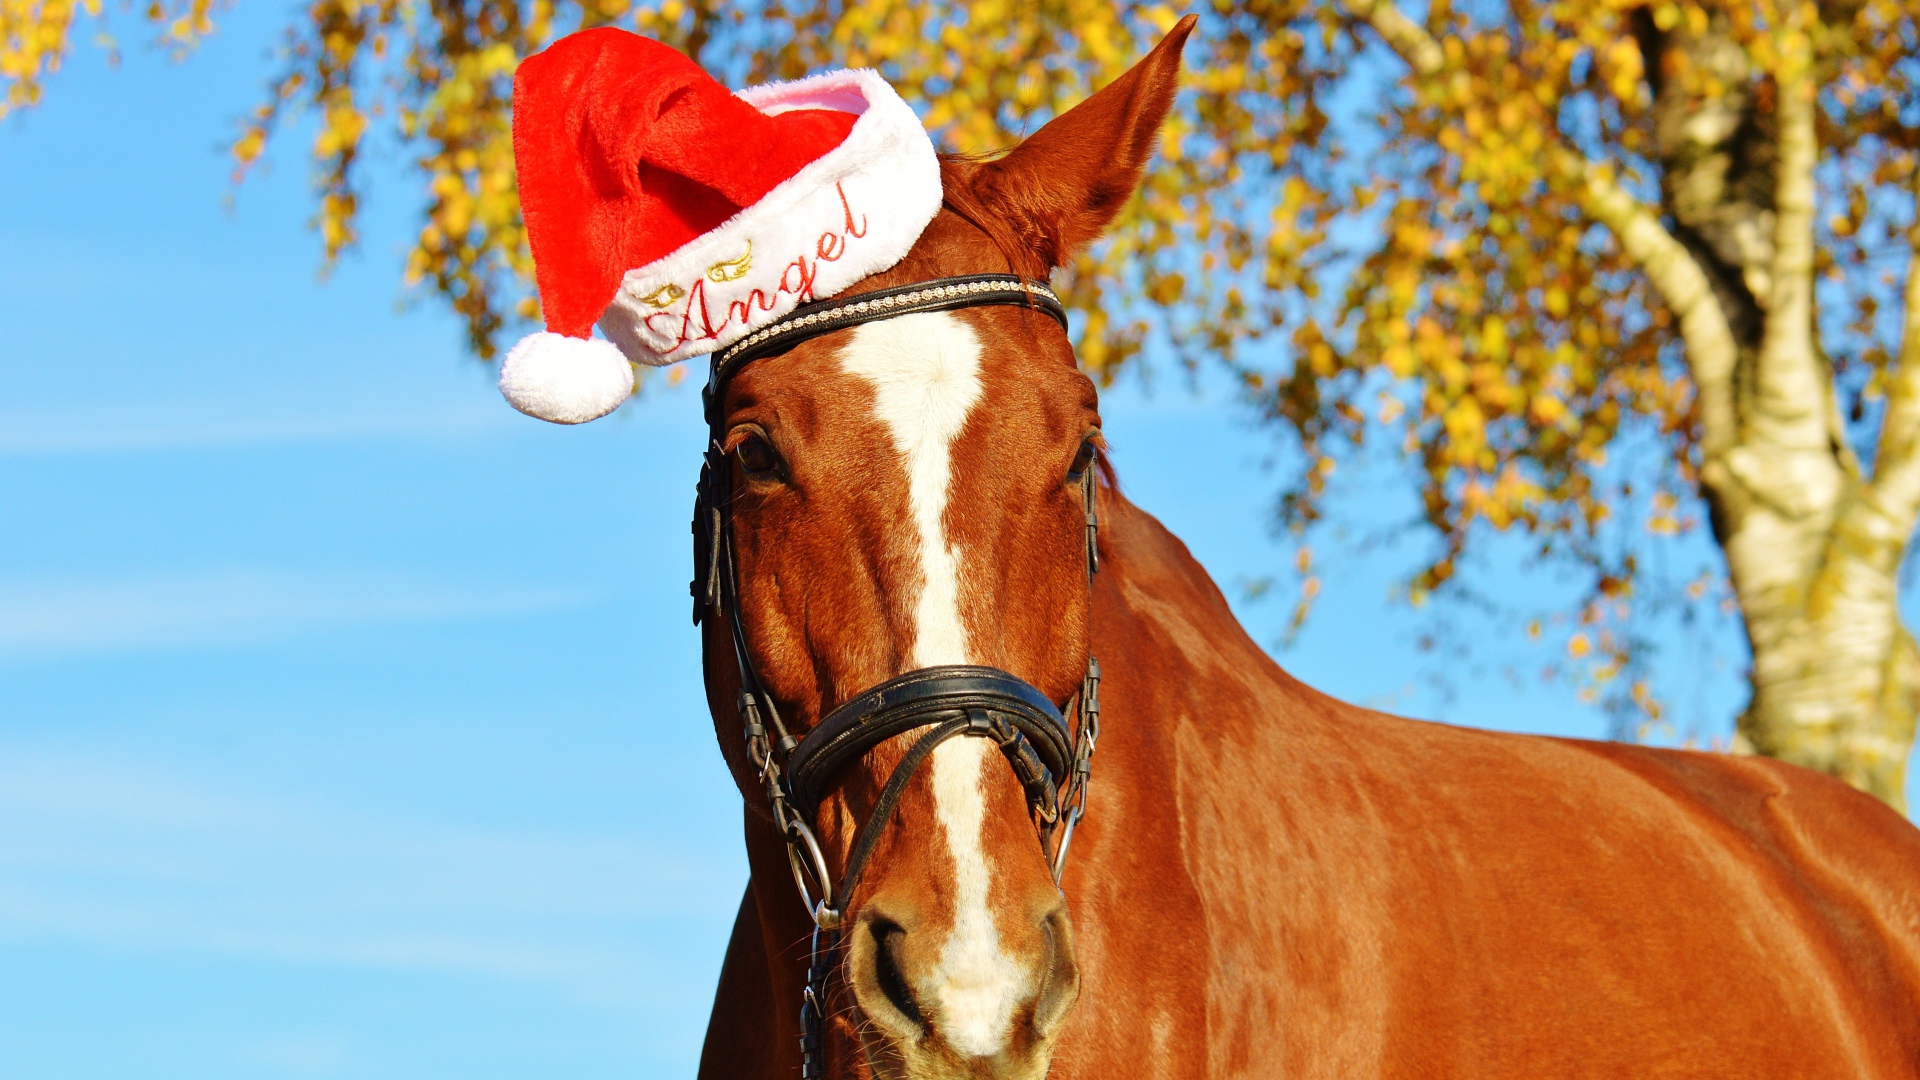 Big brown horse in a red hat